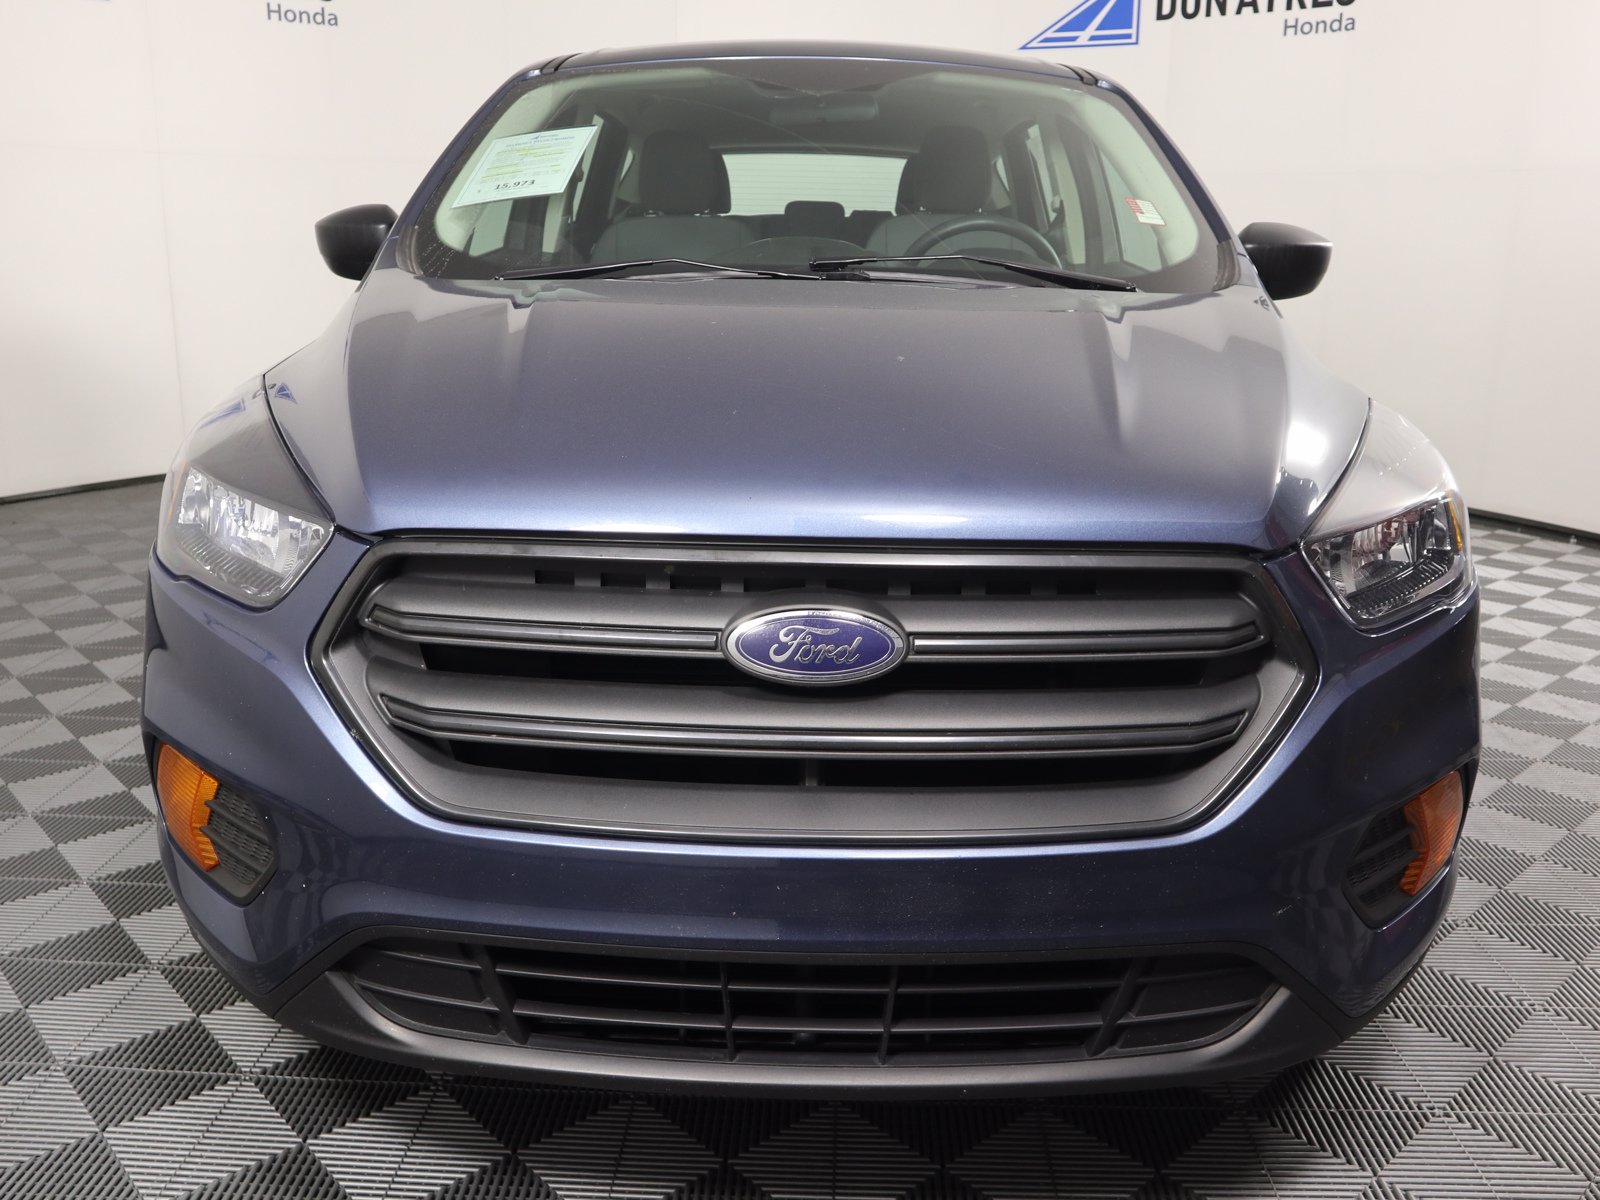 2018 ford escape owners manual